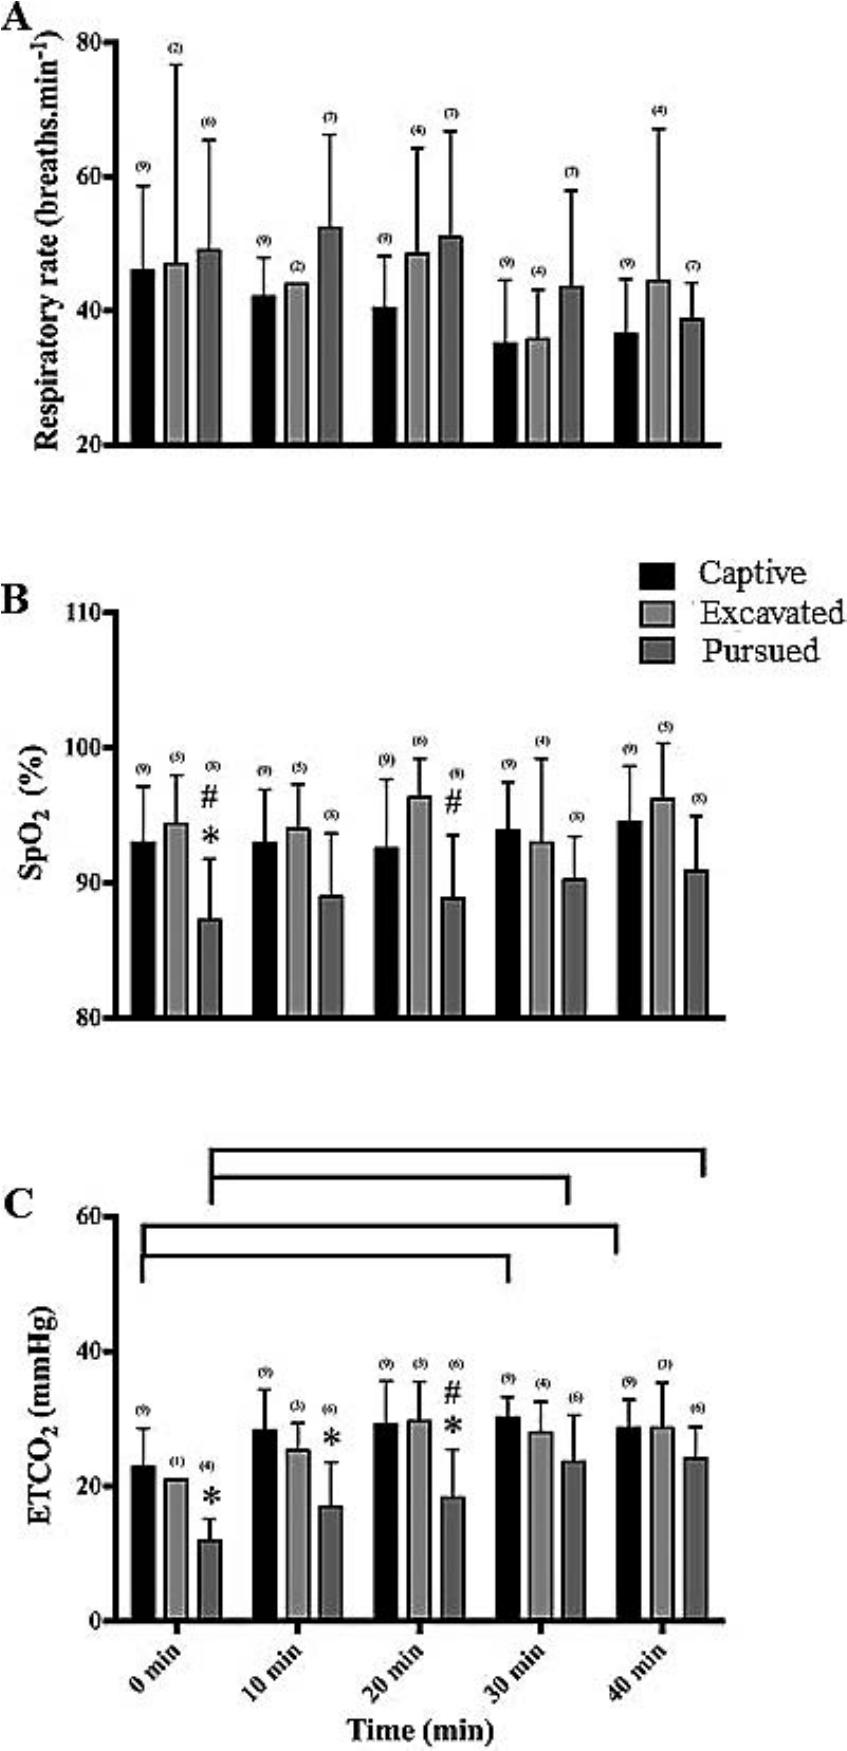 Evaluation Of Two Doses Of Butorphanol Medetomidine Midazolam For The Immobilization Of Wild Versus Captive Black Footed Cats Felis Nigripes